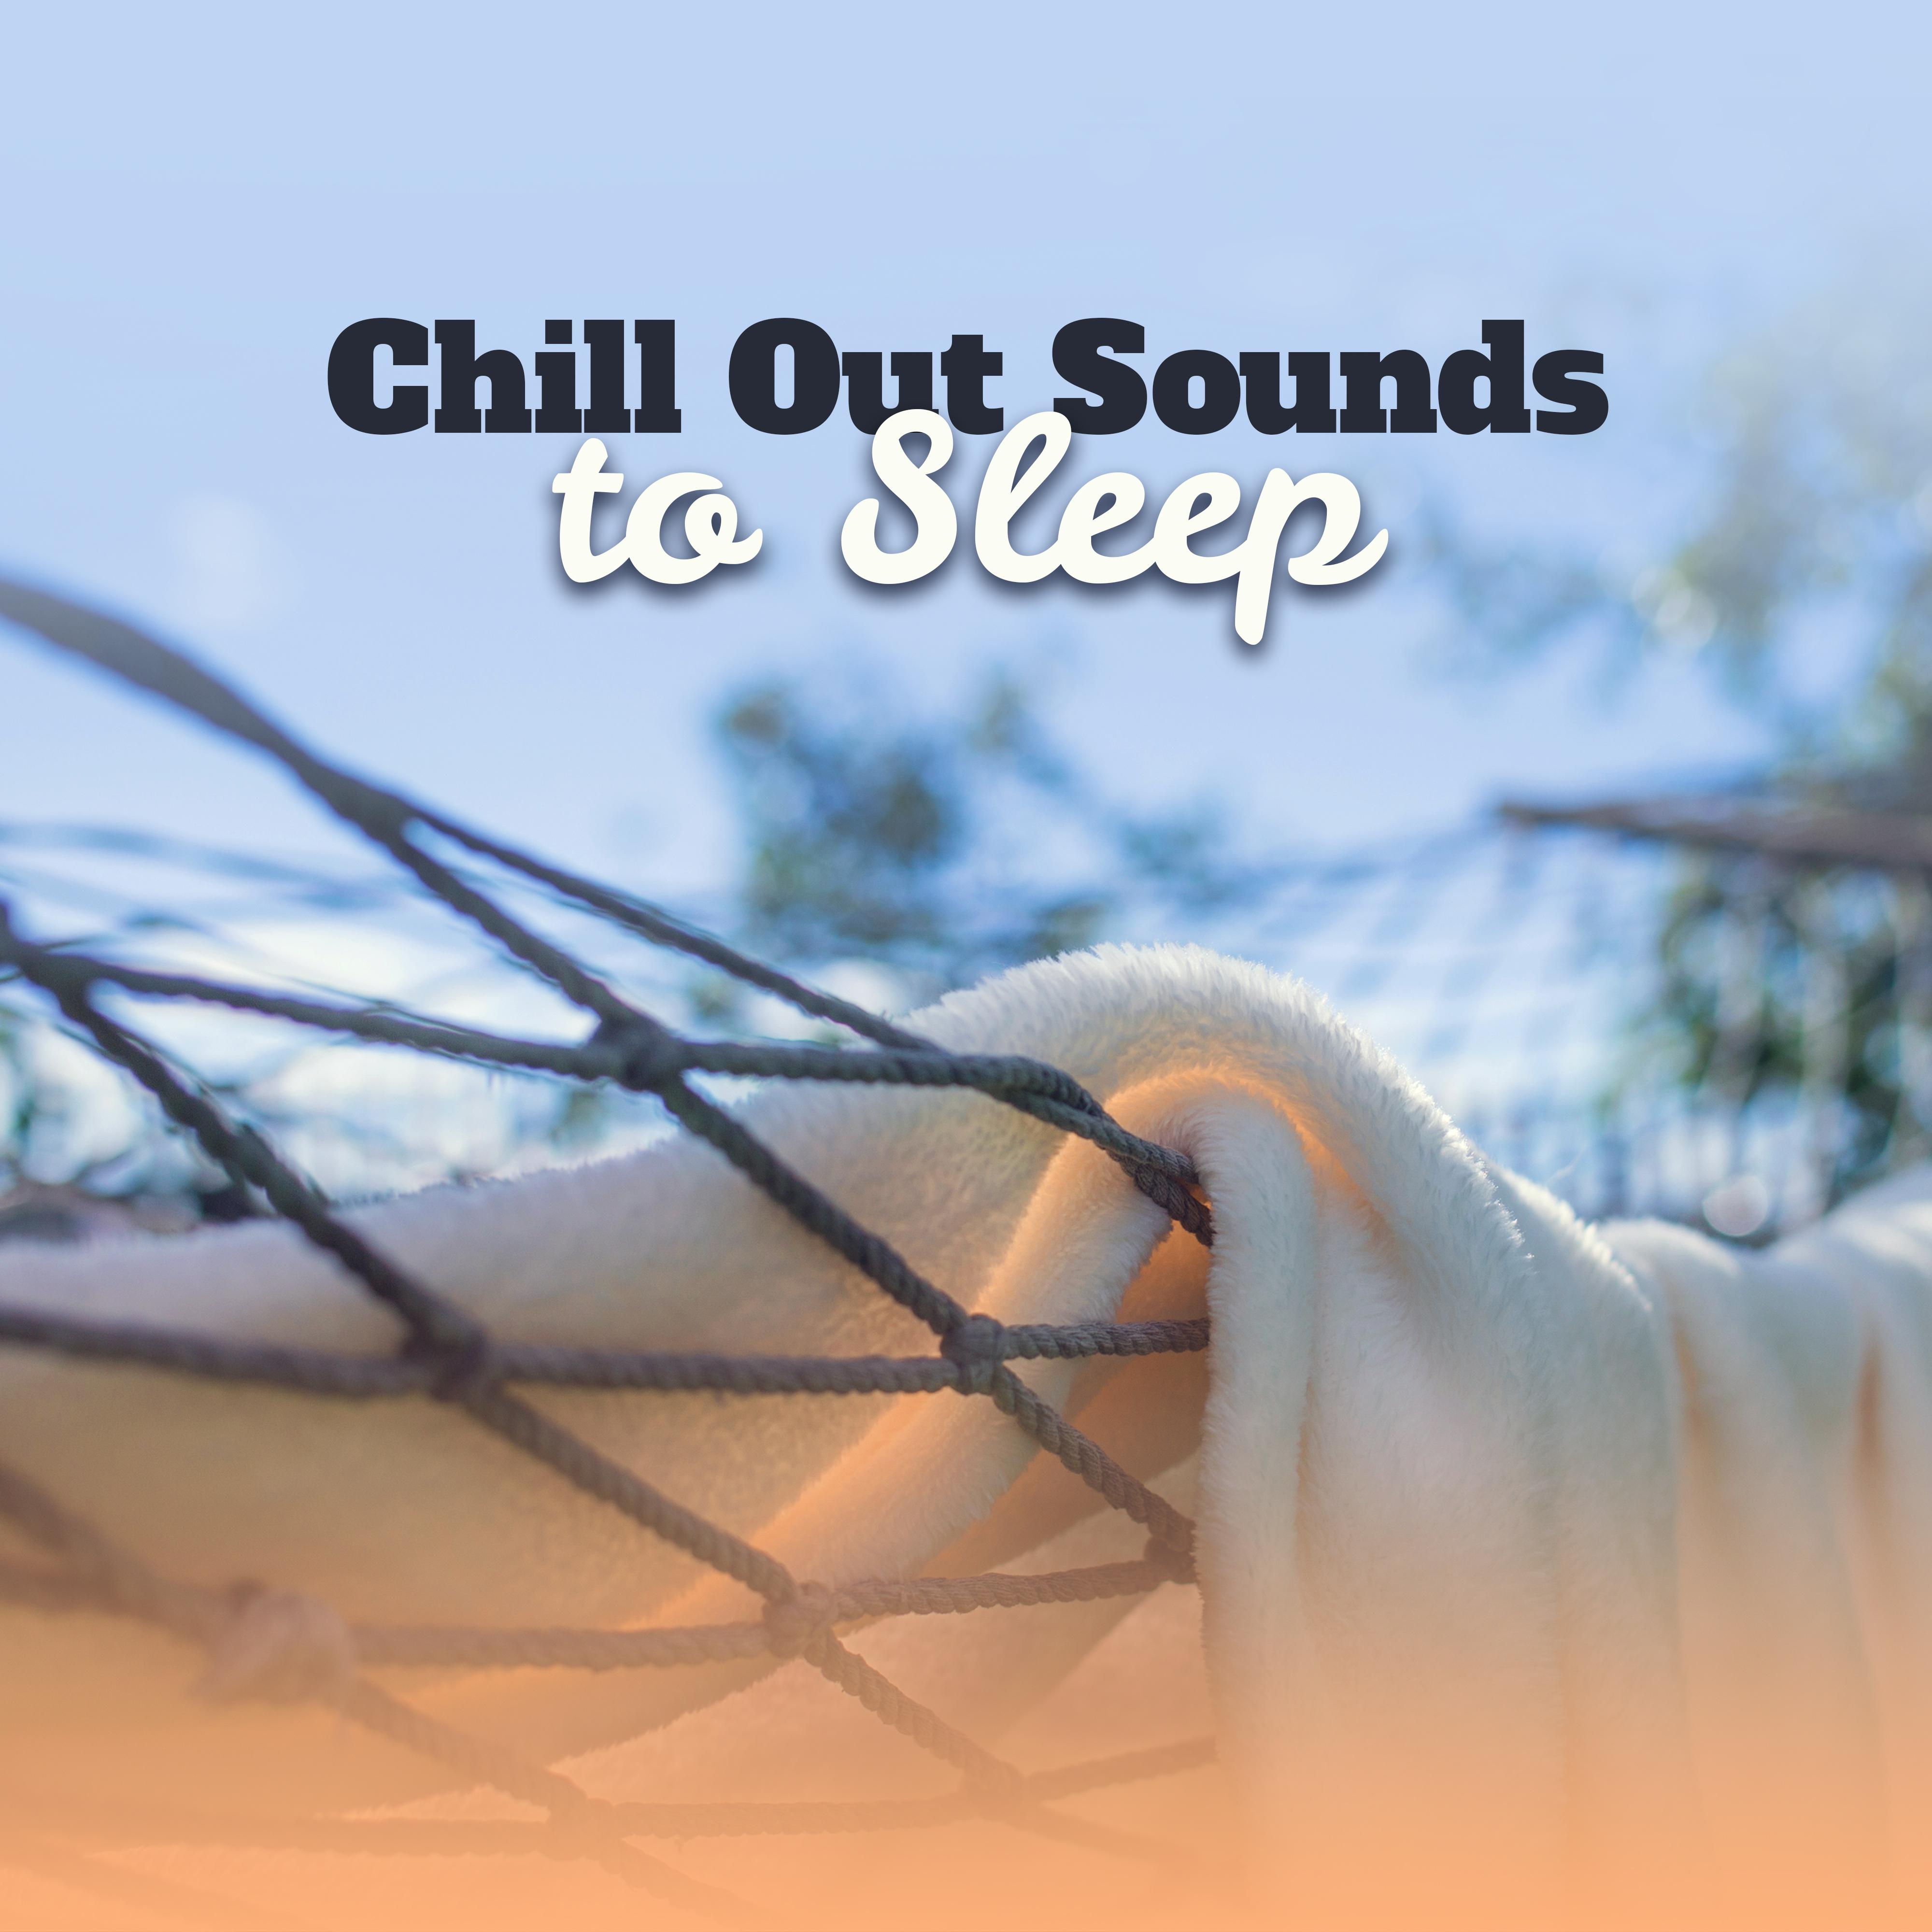 Chill Out Sounds to Sleep  Relaxing Night Chill, Summer Rest, Evening Beach Lounge